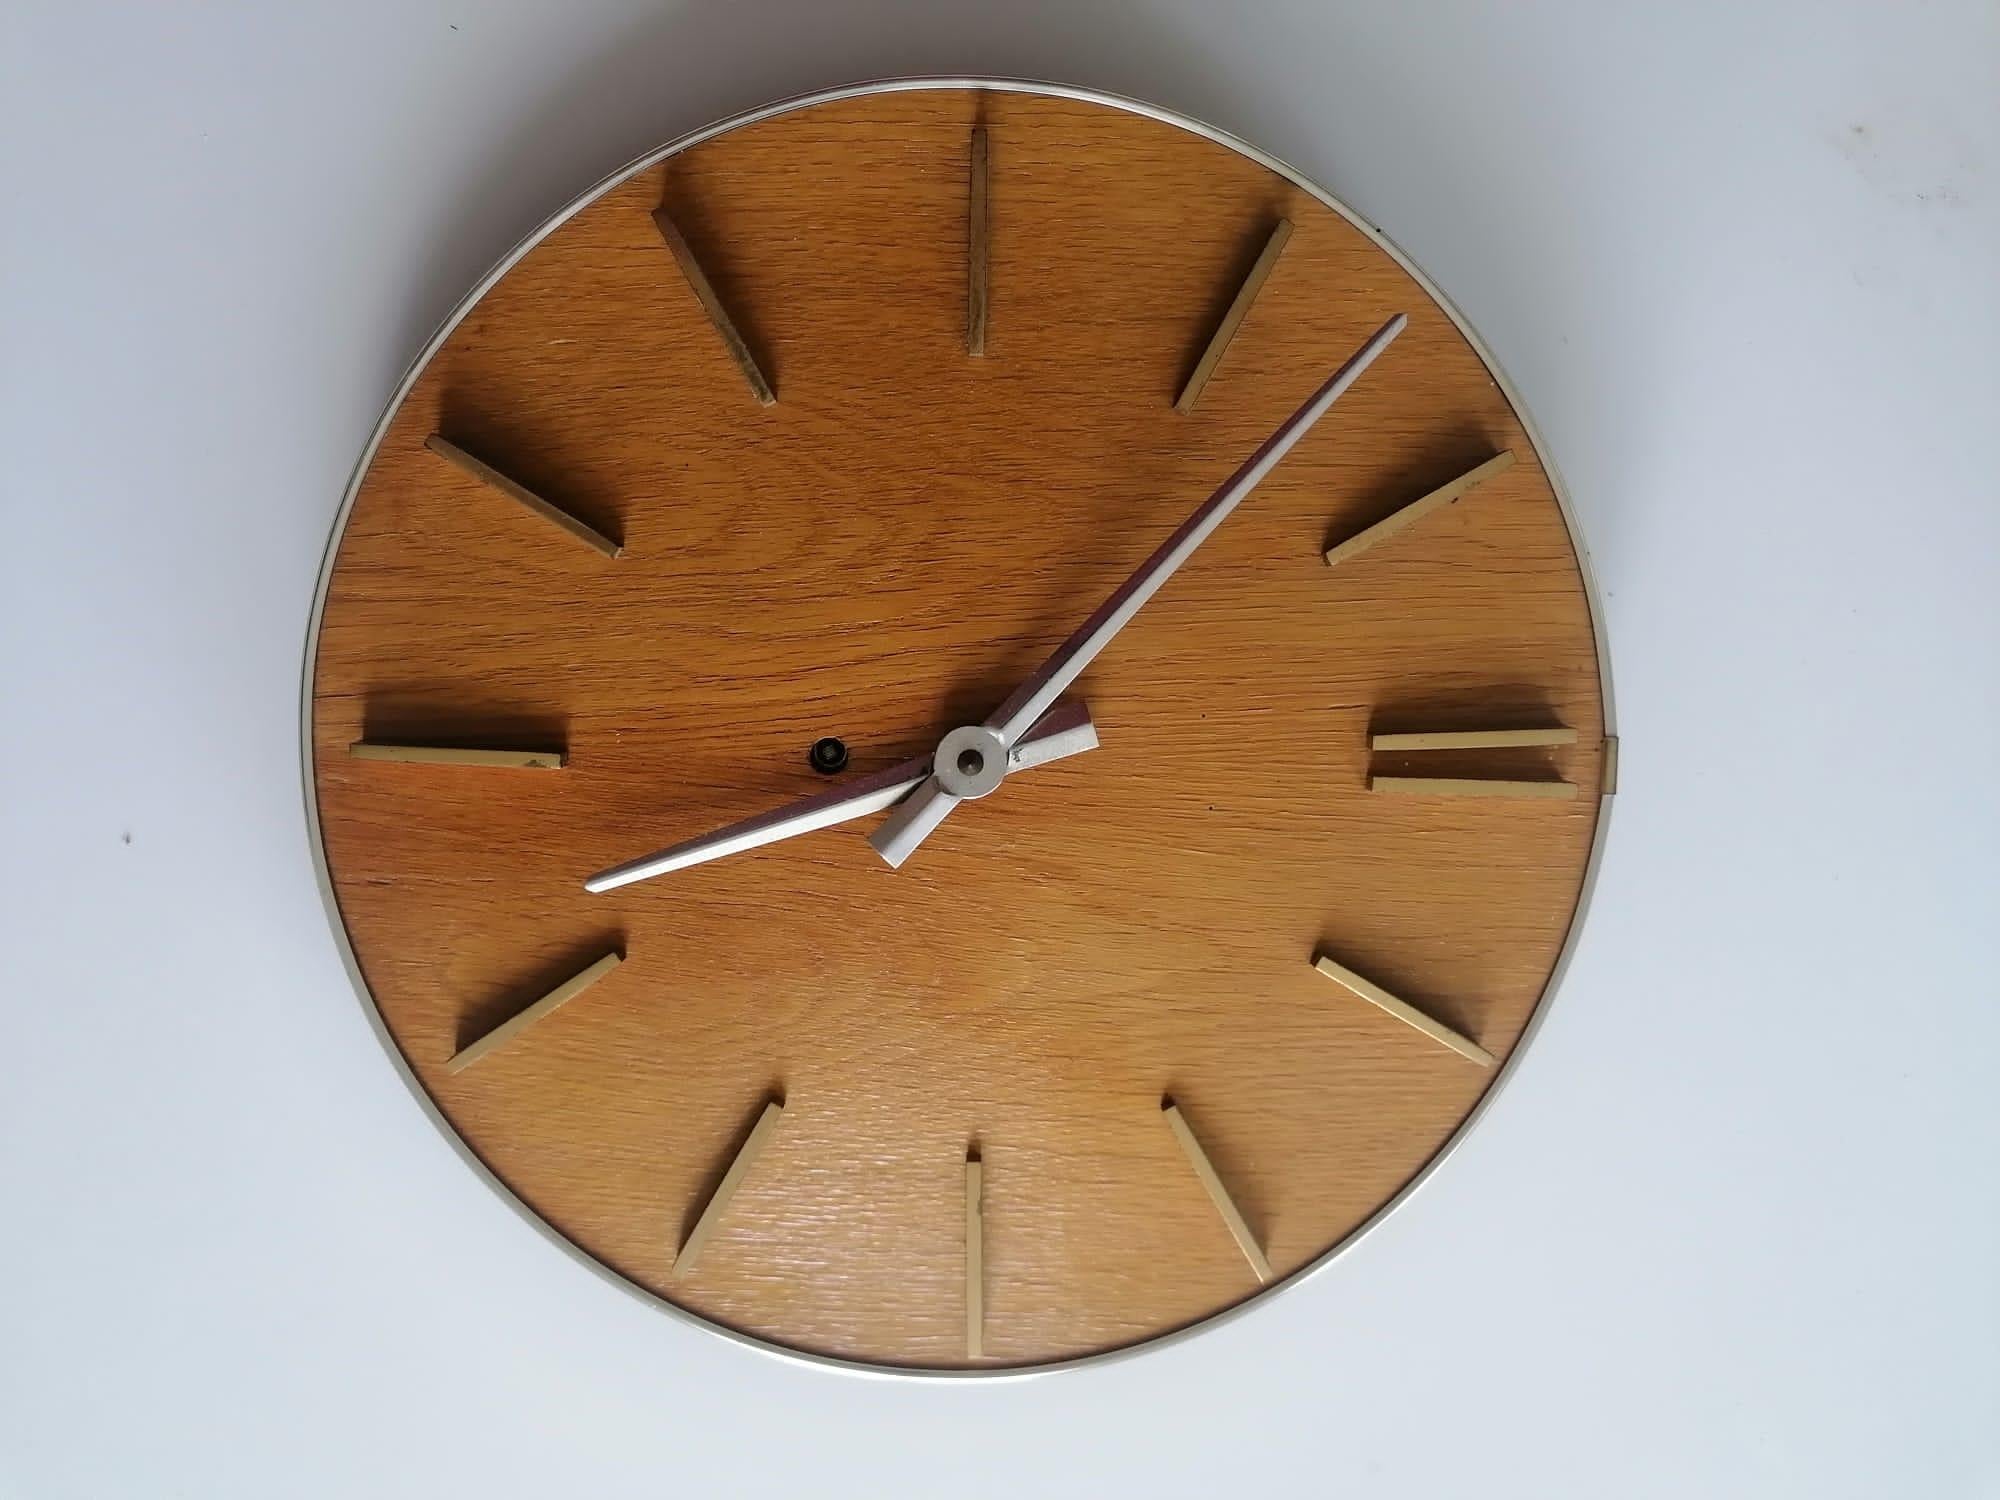 Wooden clock face and brass clock hands and index. Fitted with a battery movement. Made in Germany in the 1950s.